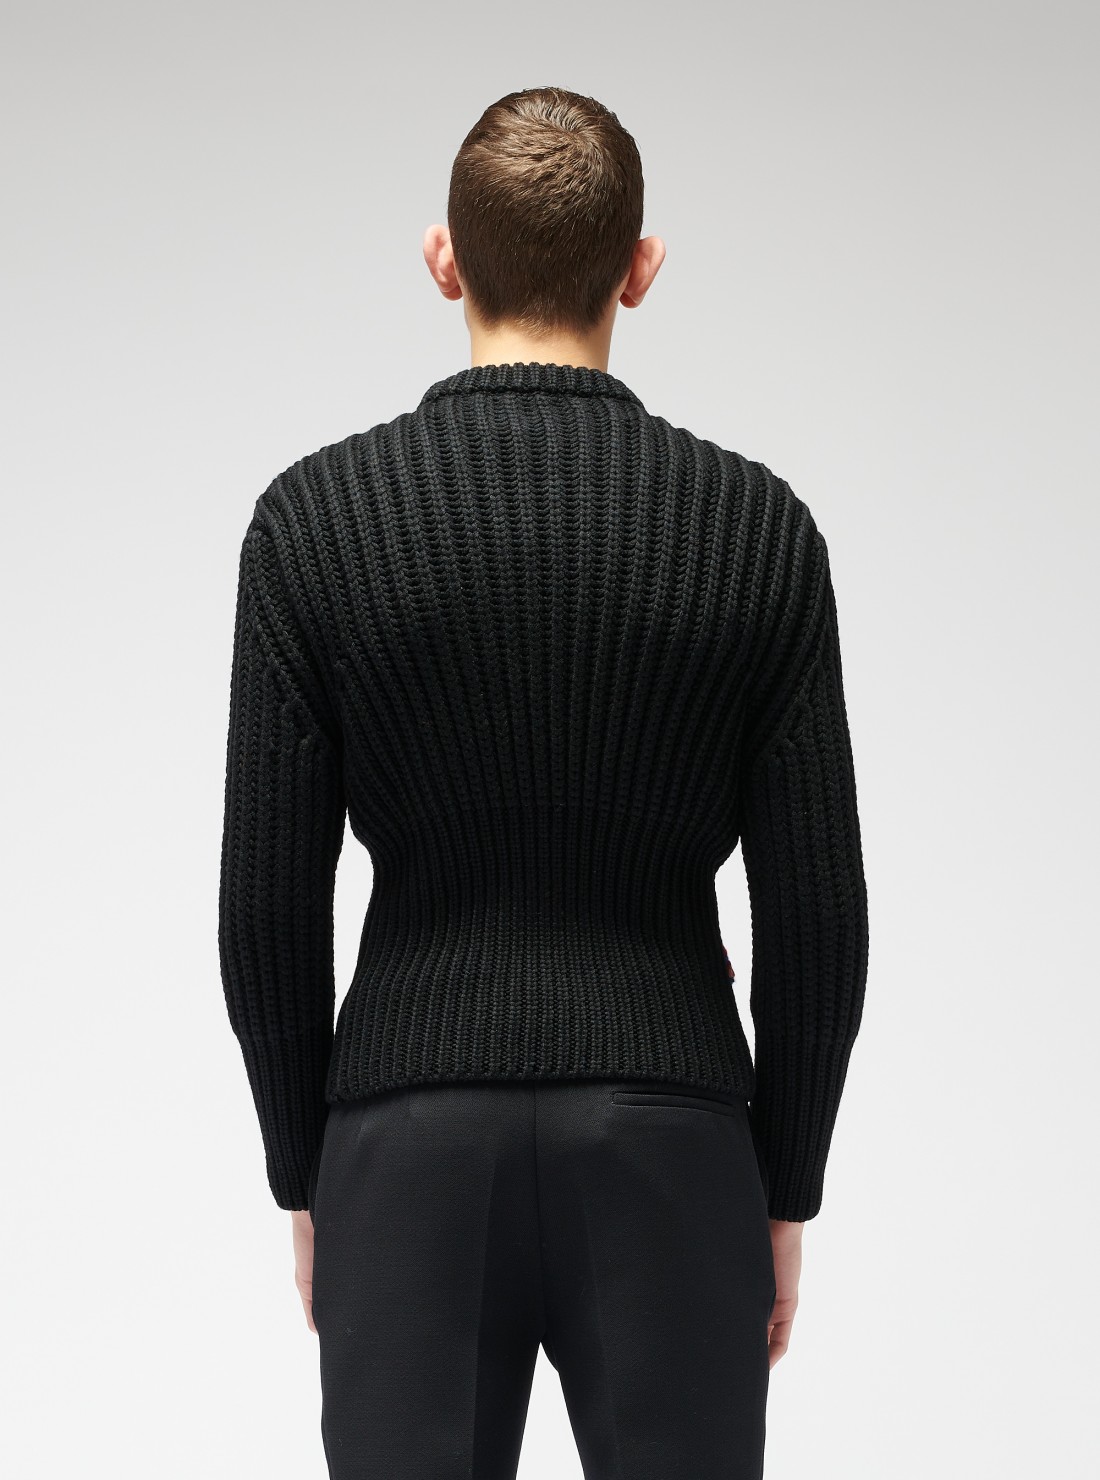 Archives redux - Fitted knit with...